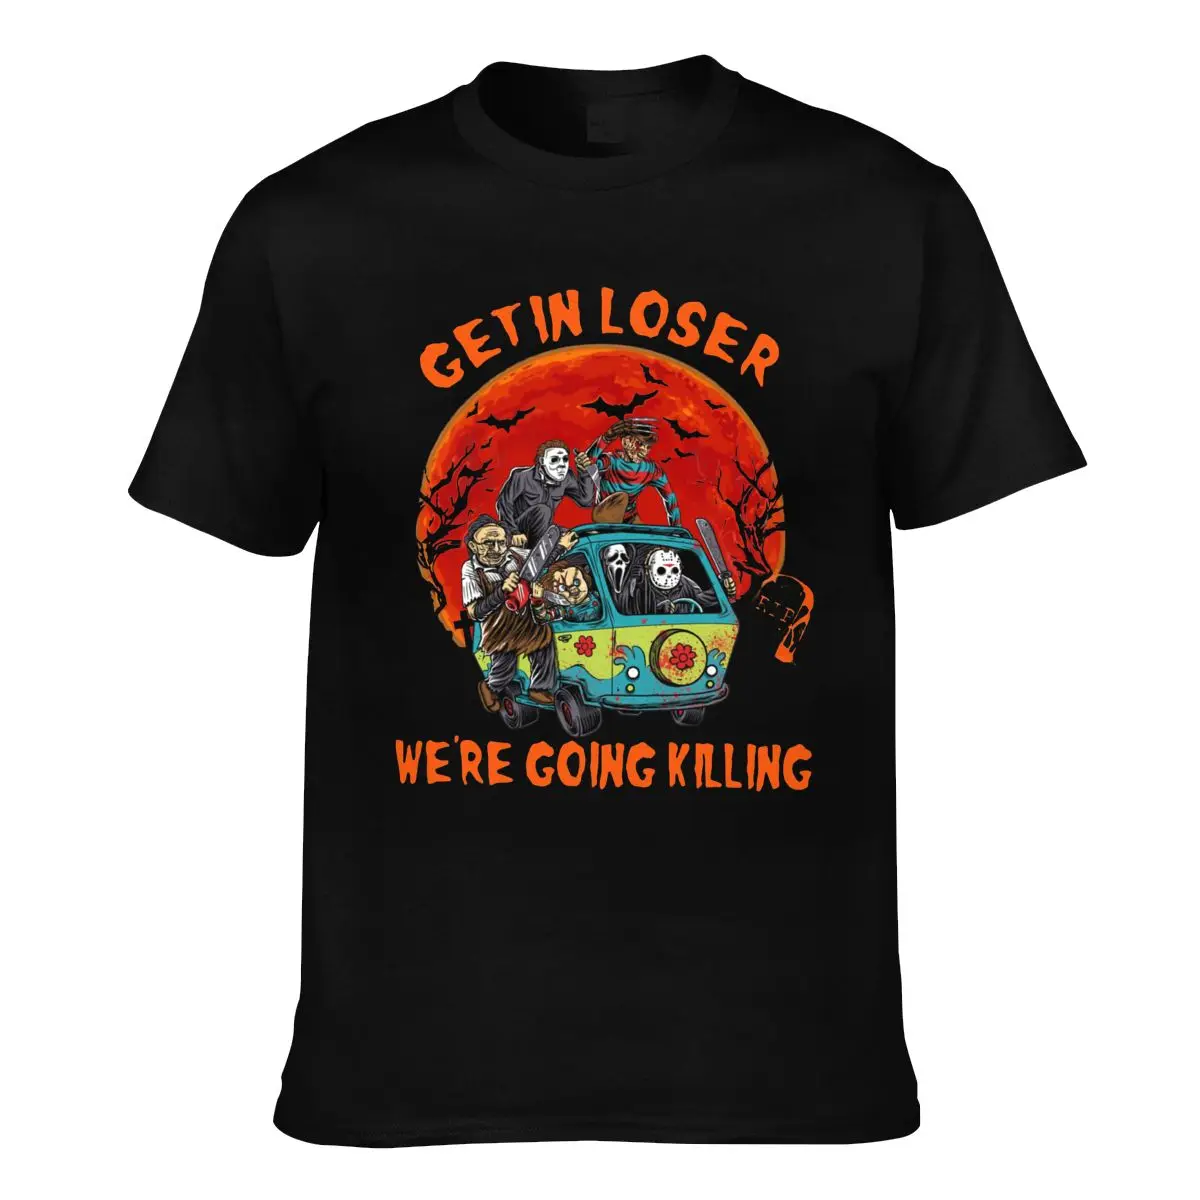 

Get In Loser We're Going Killing Retro T Shirt Men halloween scary ghost spooky Essential T Shirts Round Neck Print Top Tees